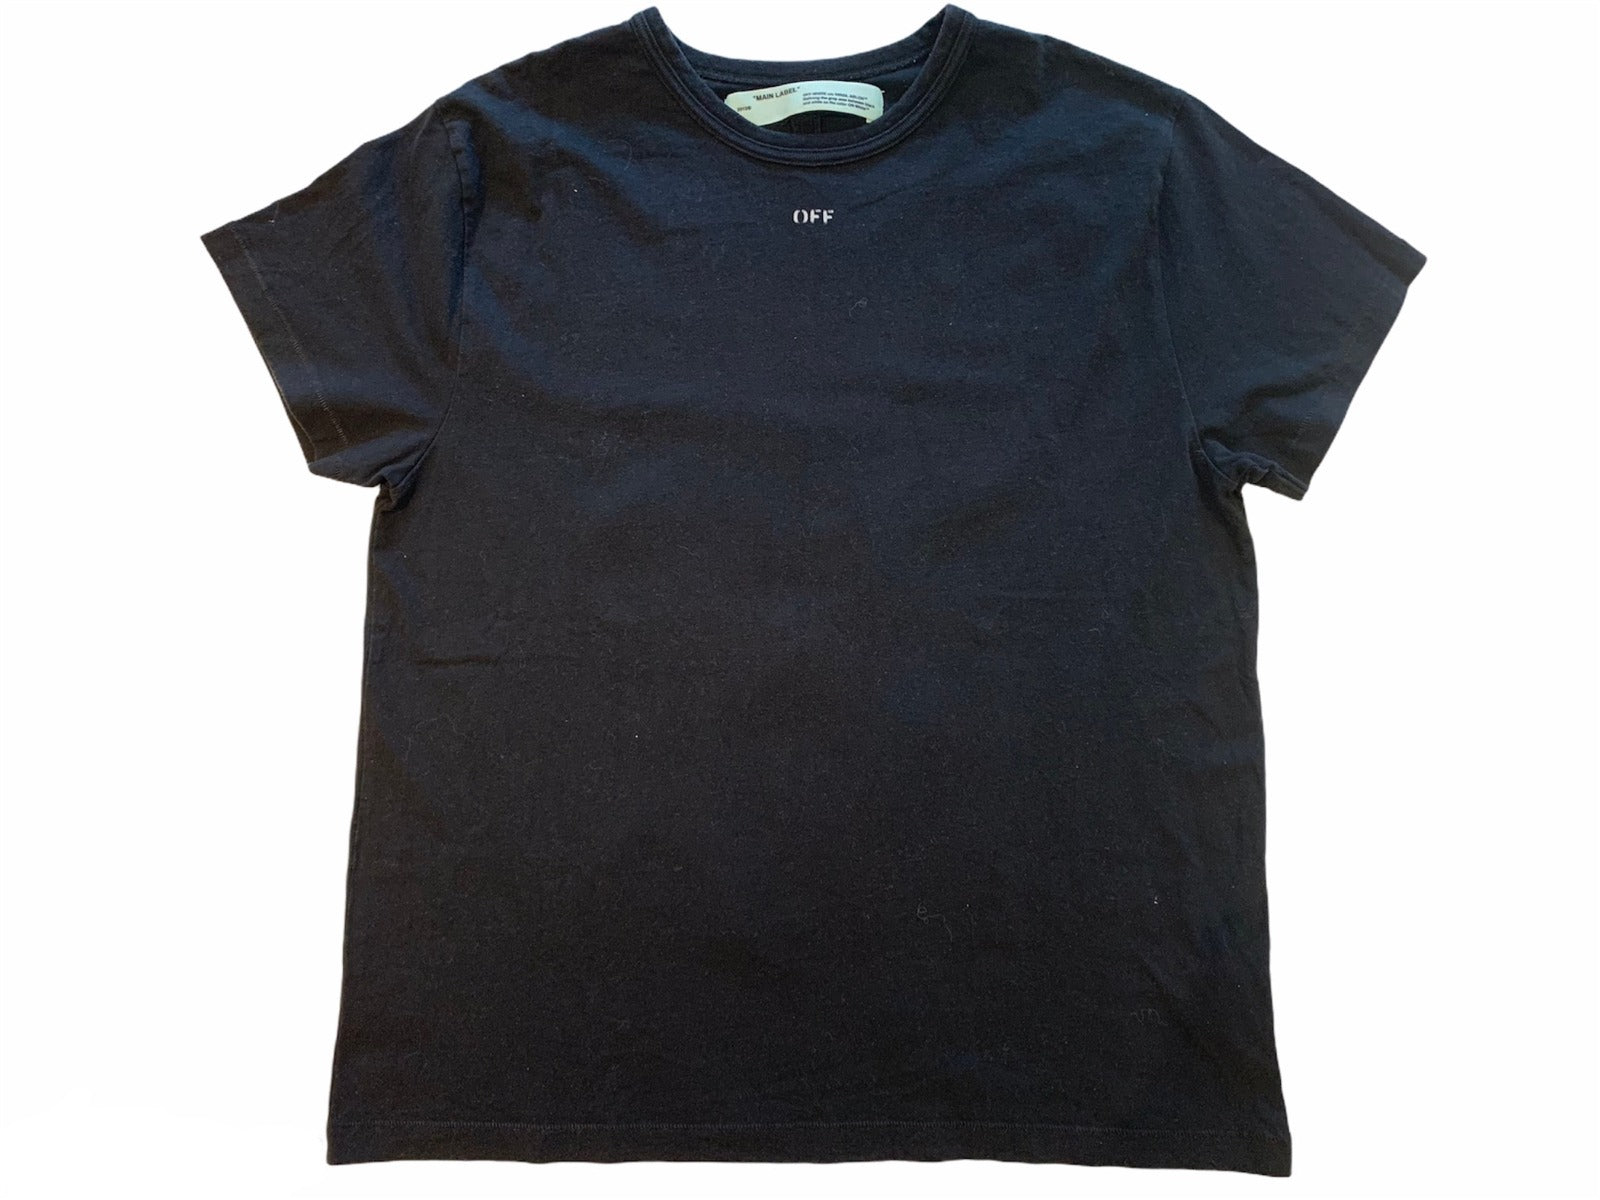 Pre Loved - Off-White 2013 Off Back T-Shirt Black Size Medium product